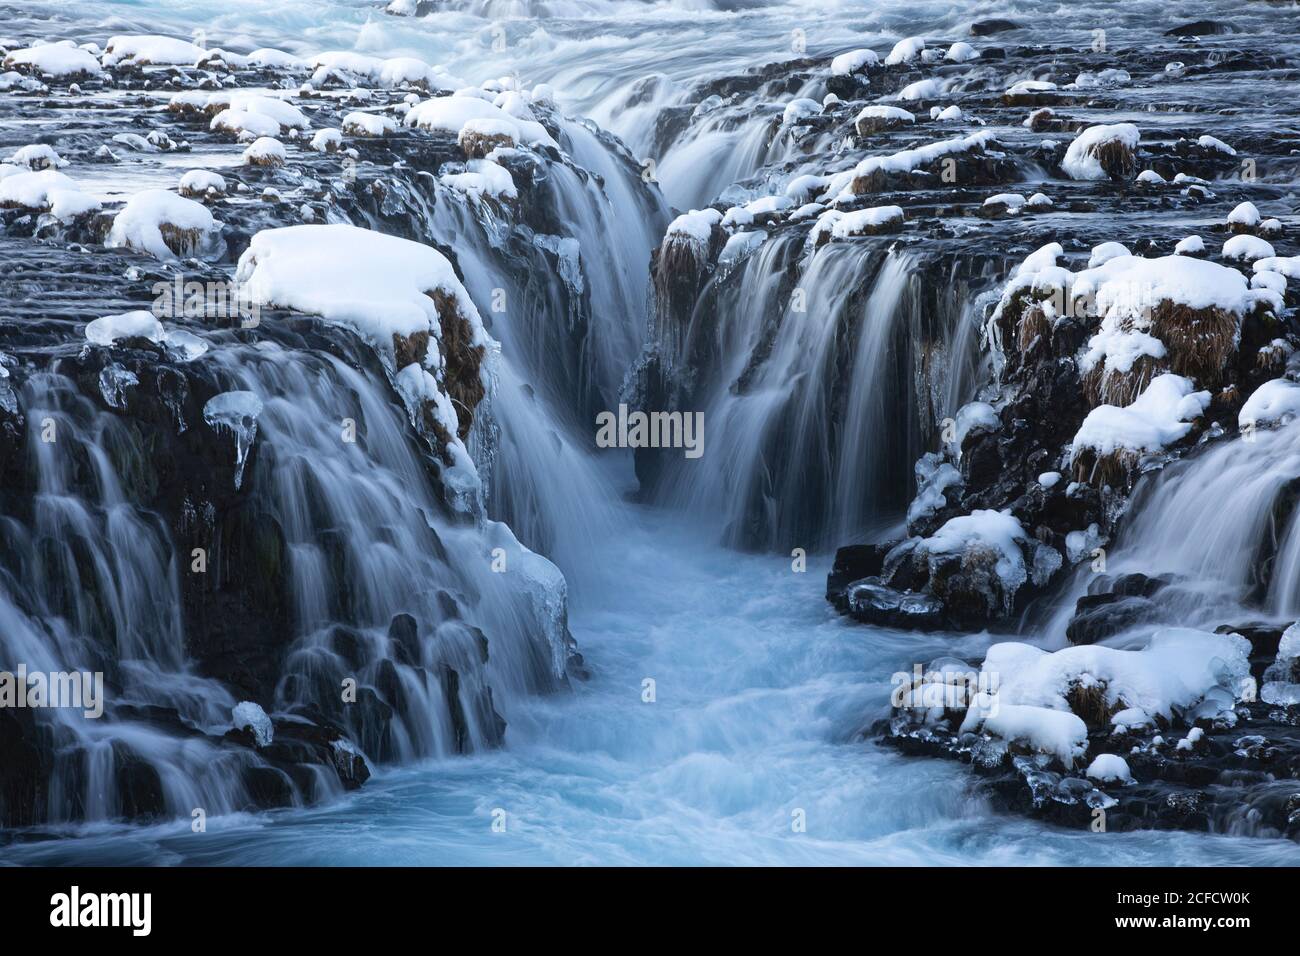 Amazing Nordic scenery of frozen waterfalls and river flowing through rough volcanic terrain covered with snow in Iceland Stock Photo